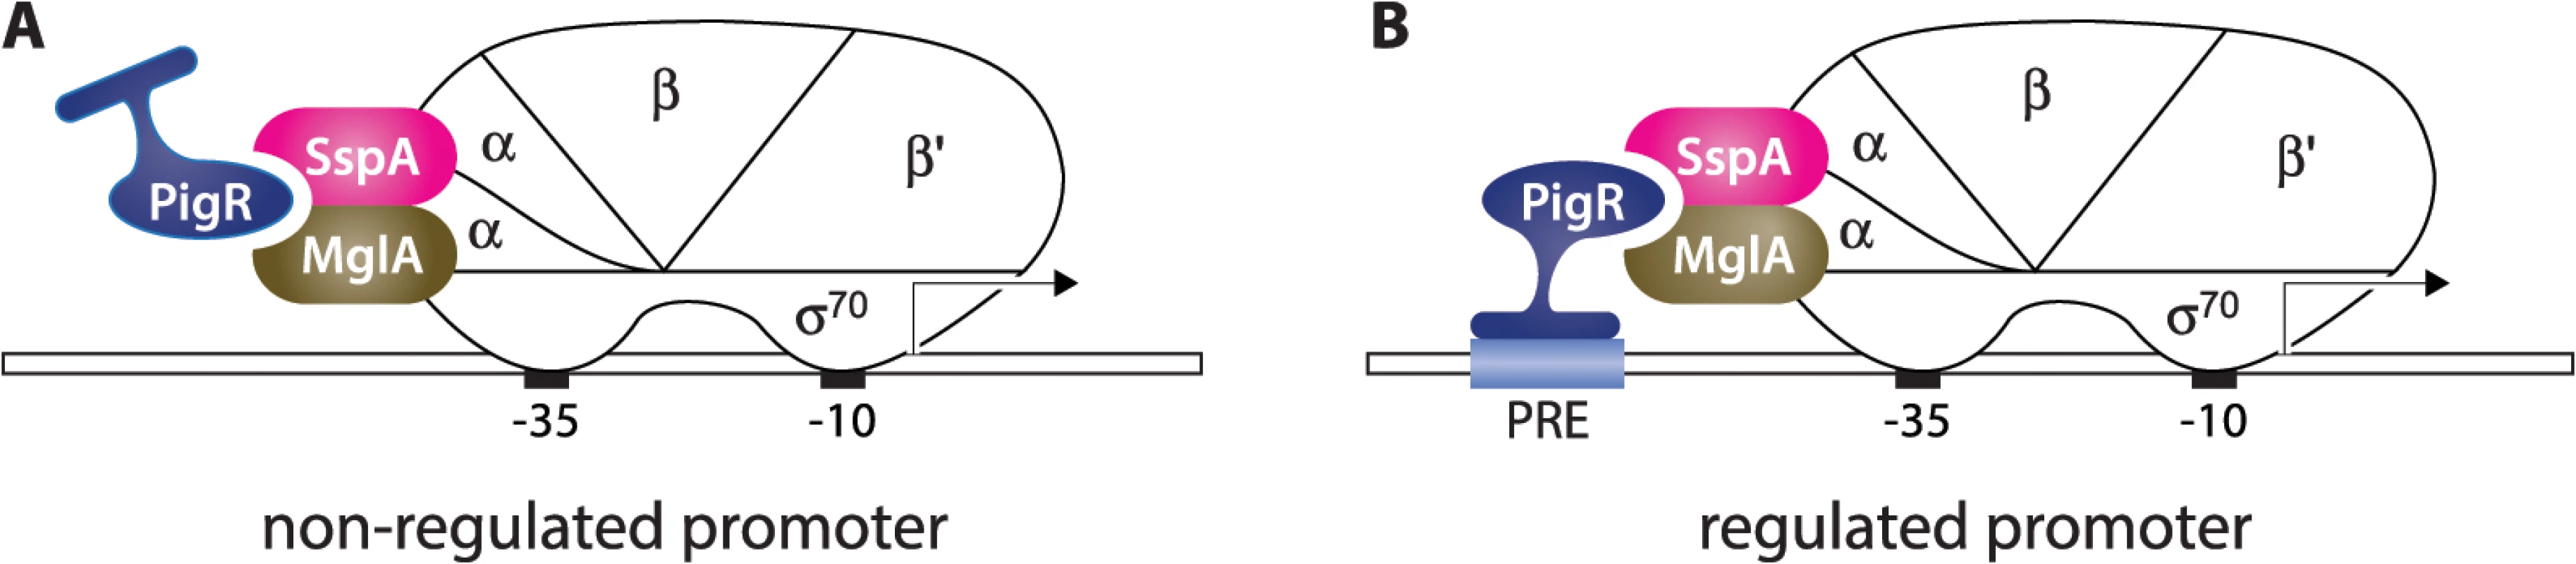 Model for how PigR functions coordinately with the MglA-SspA complex to positively control the expression of genes.